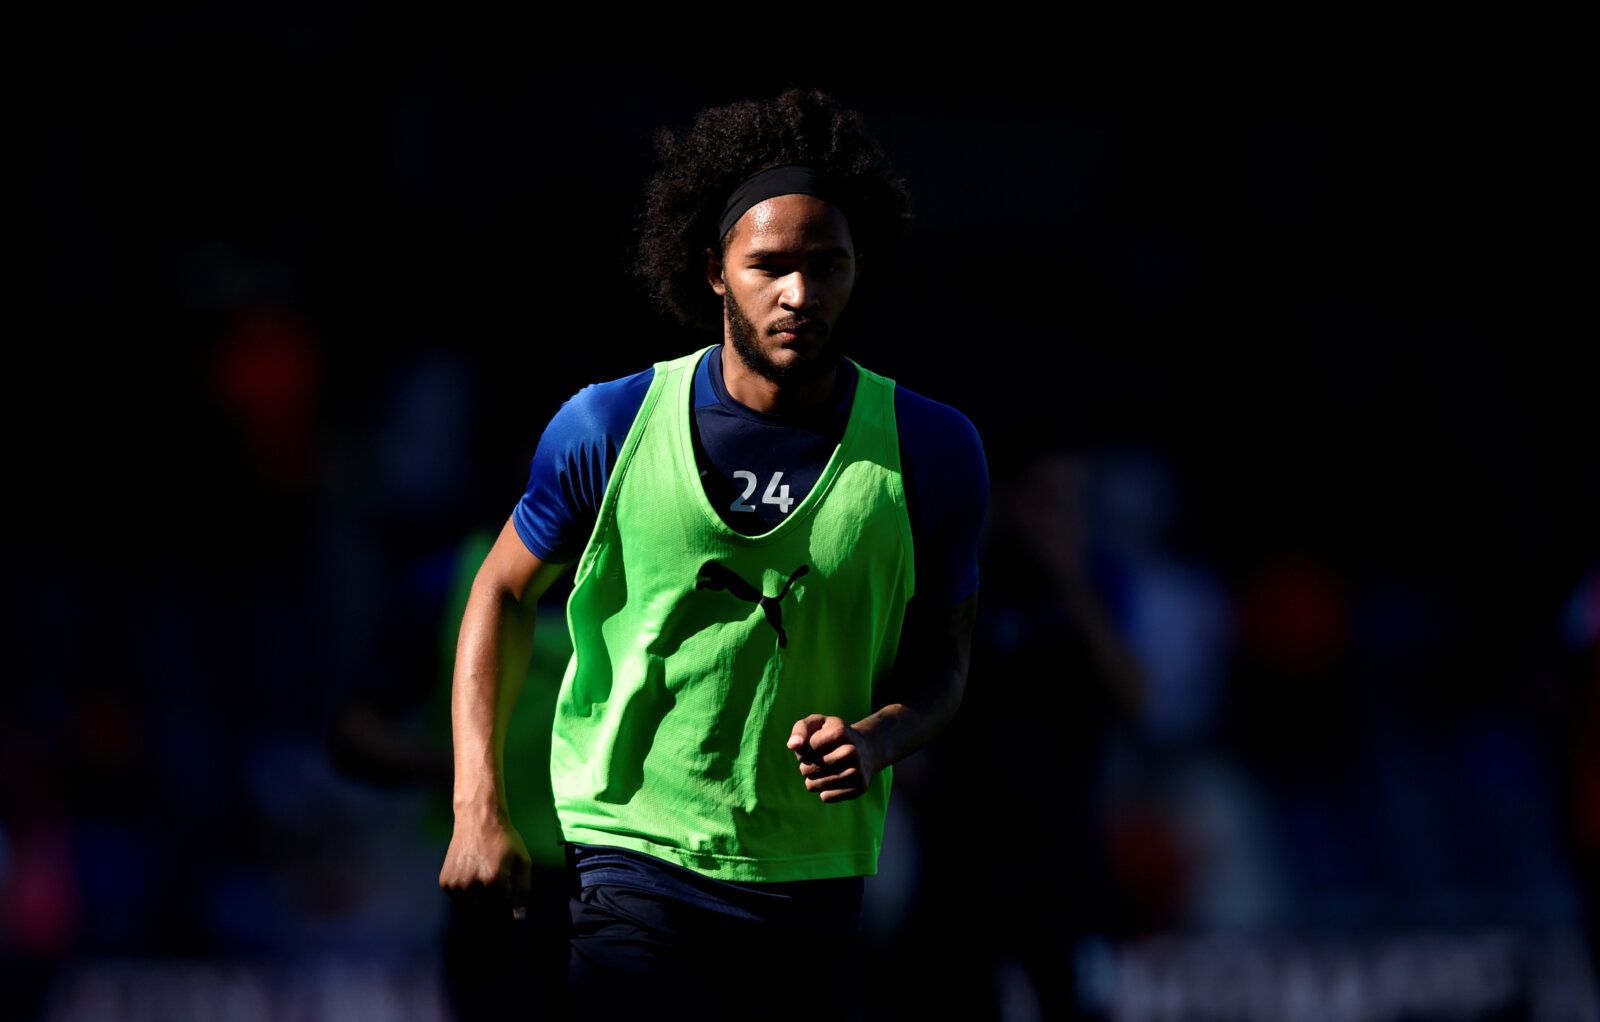 Soccer Football - Championship - Luton Town v Hull City - Kenilworth Road, Luton, Britain - September 21, 2019  Luton Town's Izzy Brown during the warm up before the match    Action Images/Adam Holt  EDITORIAL USE ONLY. No use with unauthorized audio, video, data, fixture lists, club/league logos or 